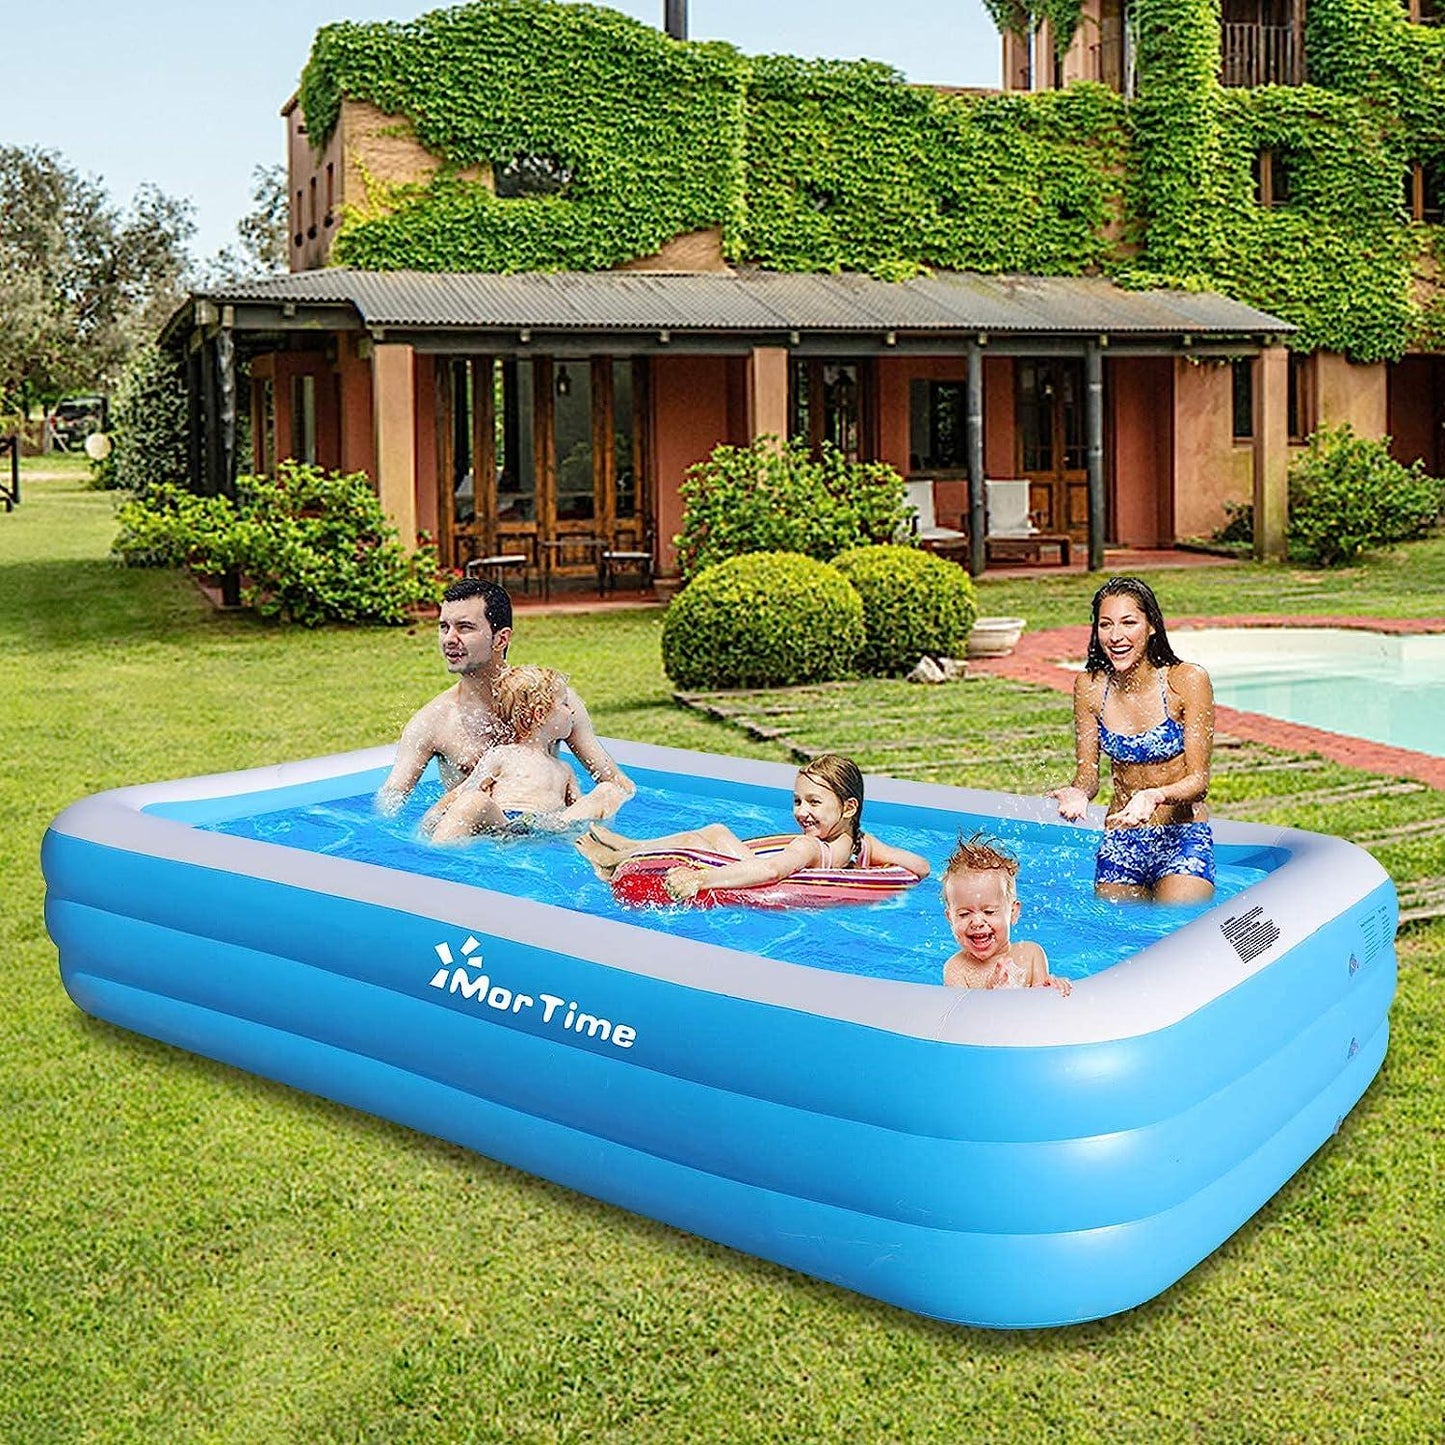 MorTime Inflatable Swimming Pool, 120 x 72 x 22 Giant Kiddie Pool for Kids and Adults Outdoor Yard Summer Party (Swimming Pool)